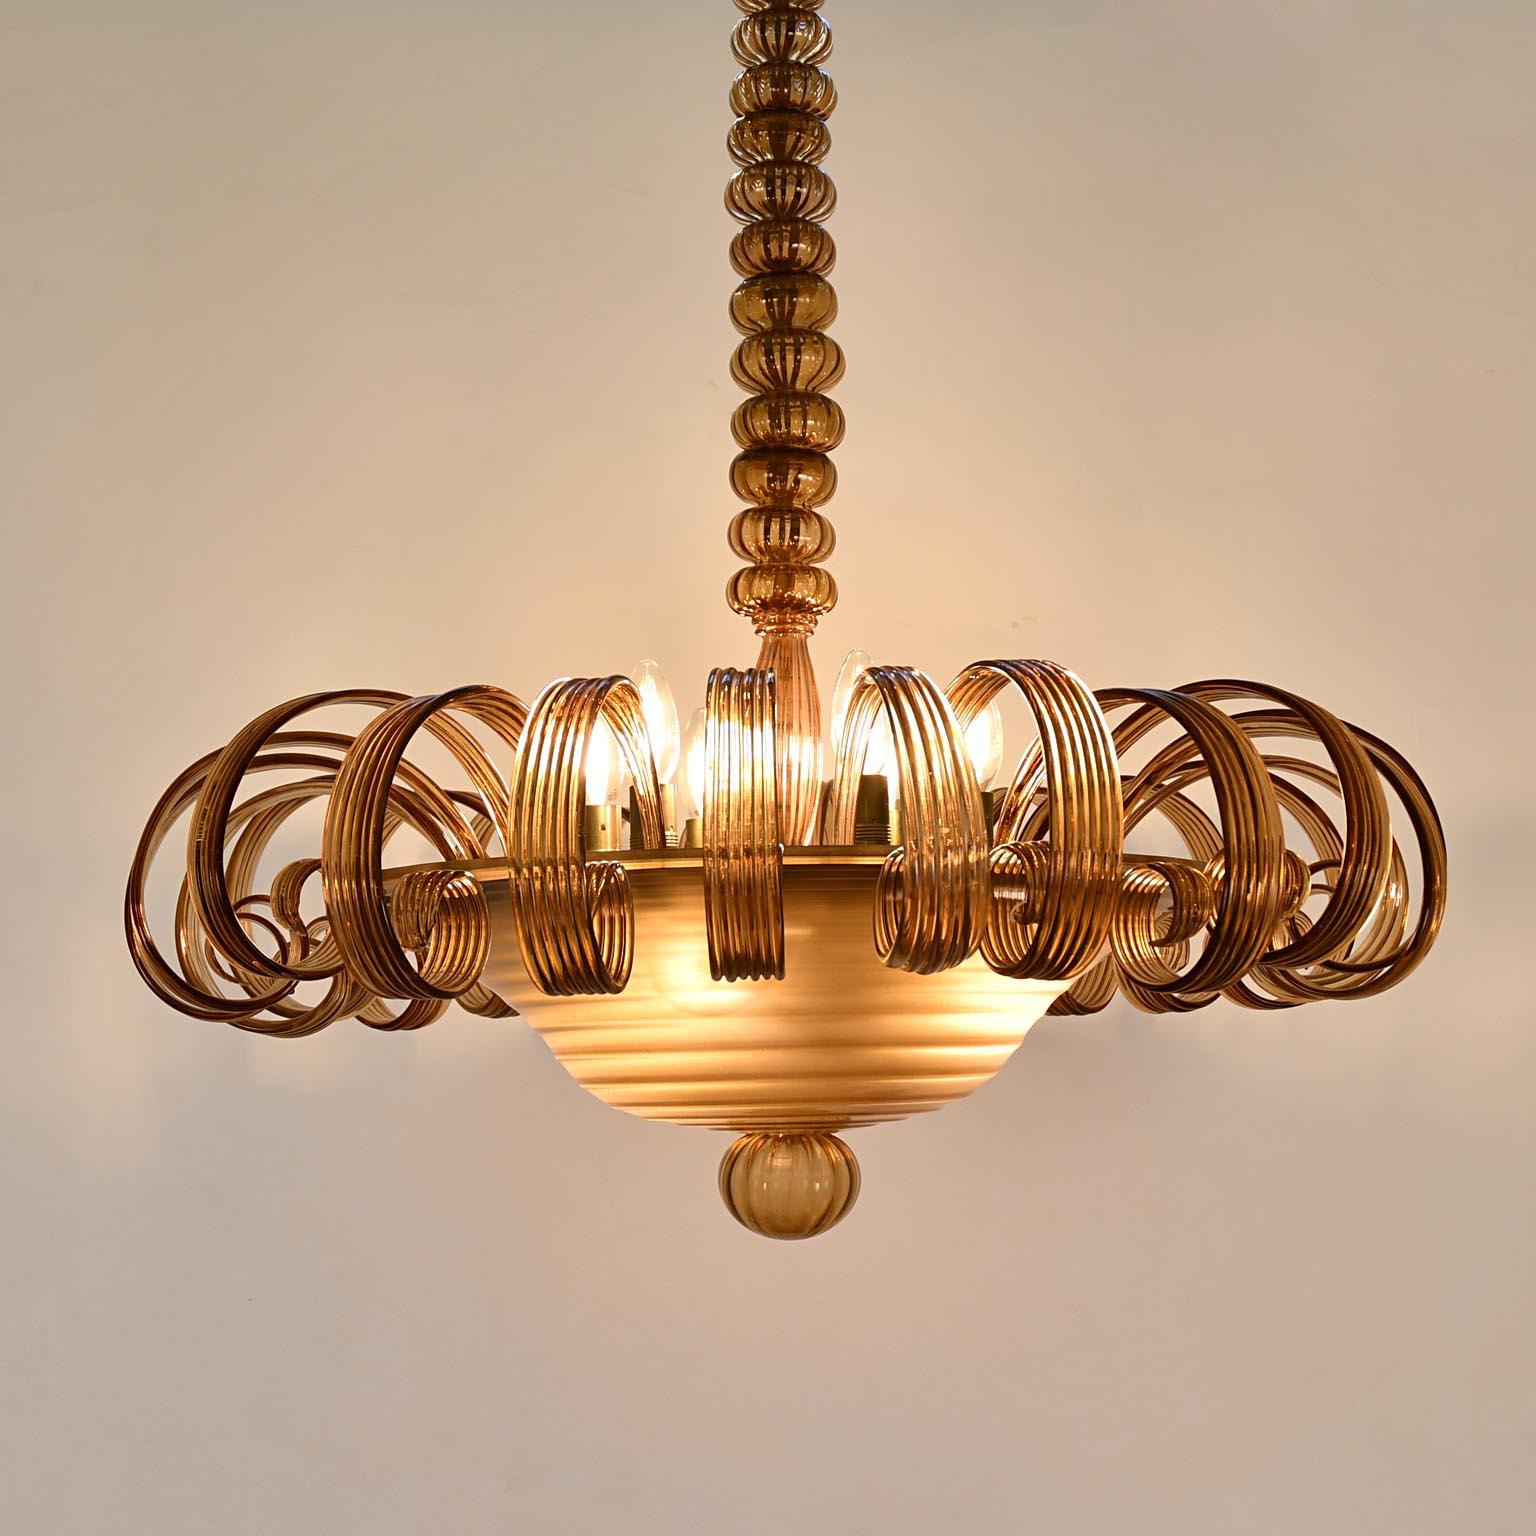 Italian Murona chandelier attributed to Barovier / Italy. The chandelier is particularly decorative when it is turned up.
23 Glass arms in the shape of a curl. The arms made of brown glass with grooves are stuck in a metal plate, which is also